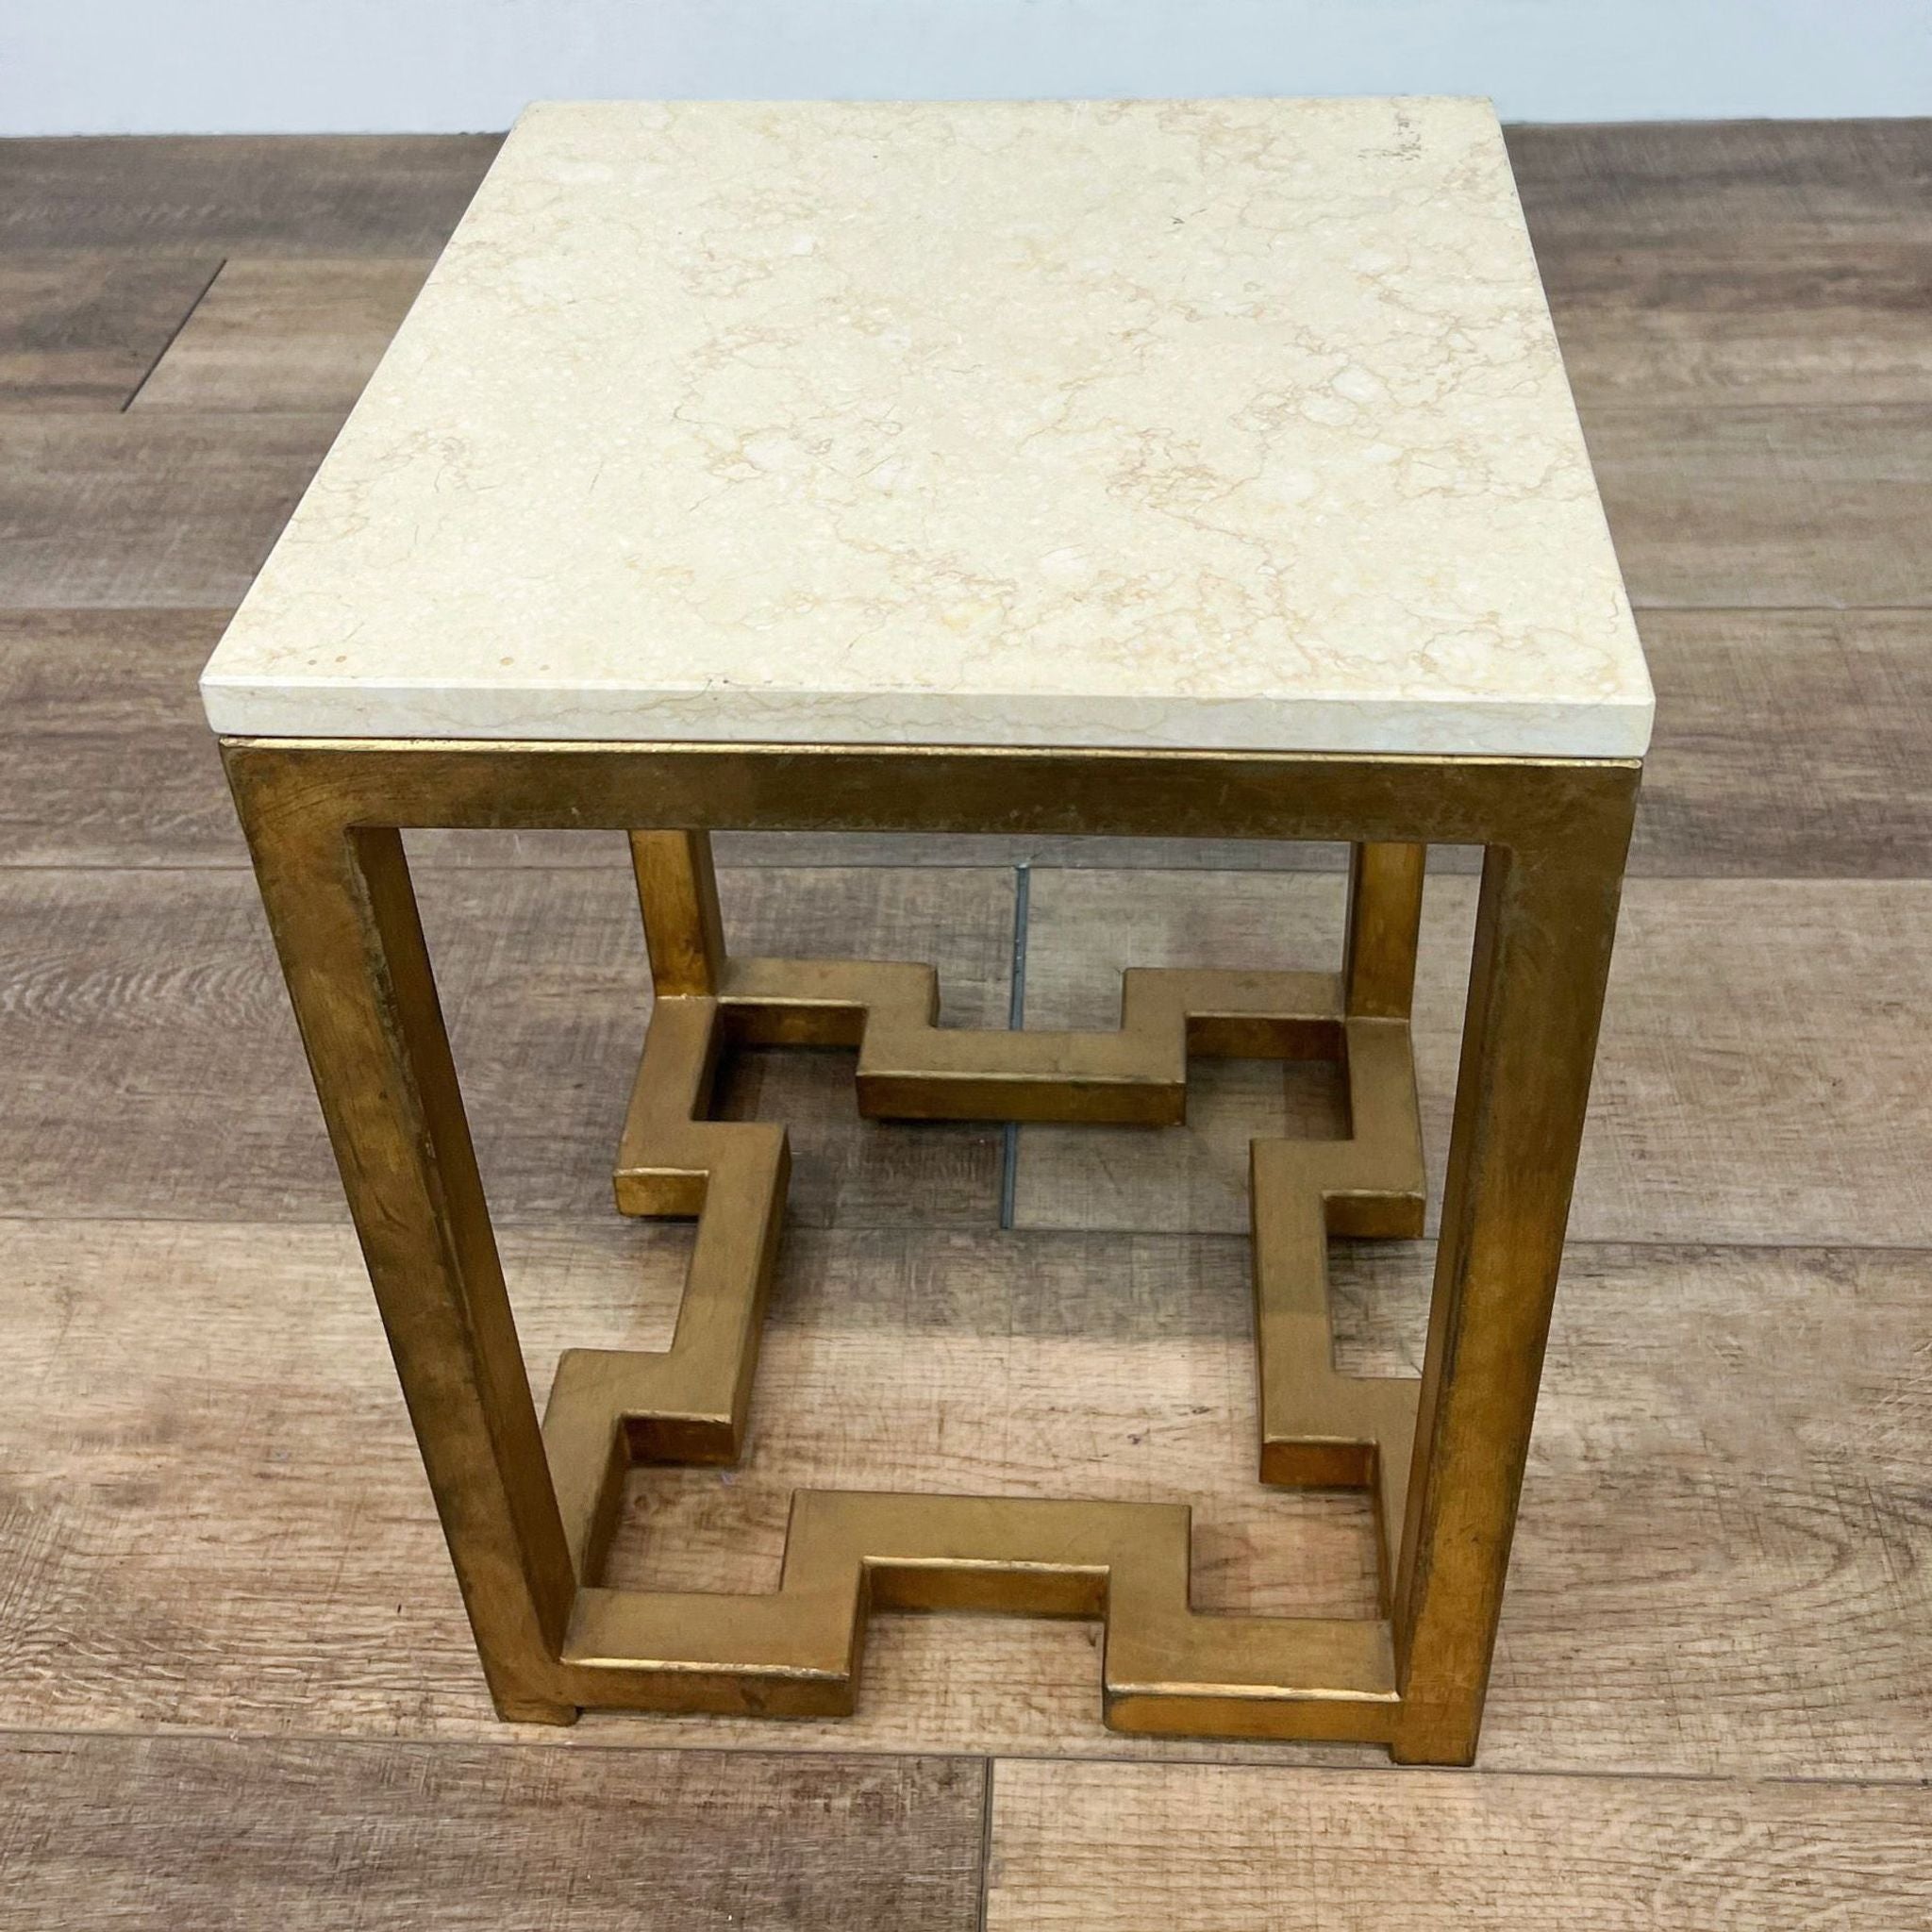 Reperch brand side table with antiqued brass finish metal base and cream-colored stone top.